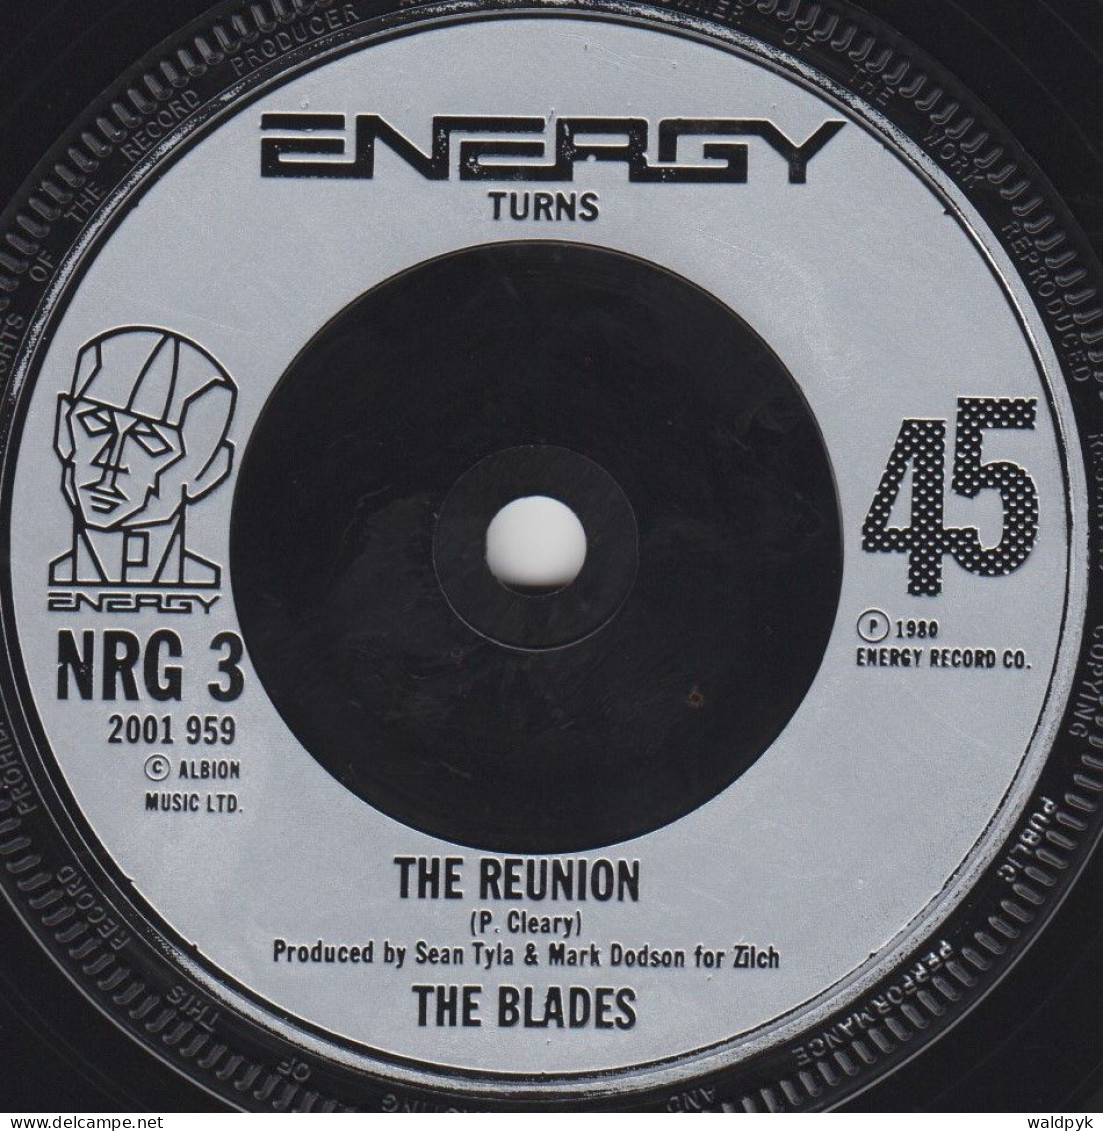 THE BLADES - Hot For You - Autres - Musique Anglaise